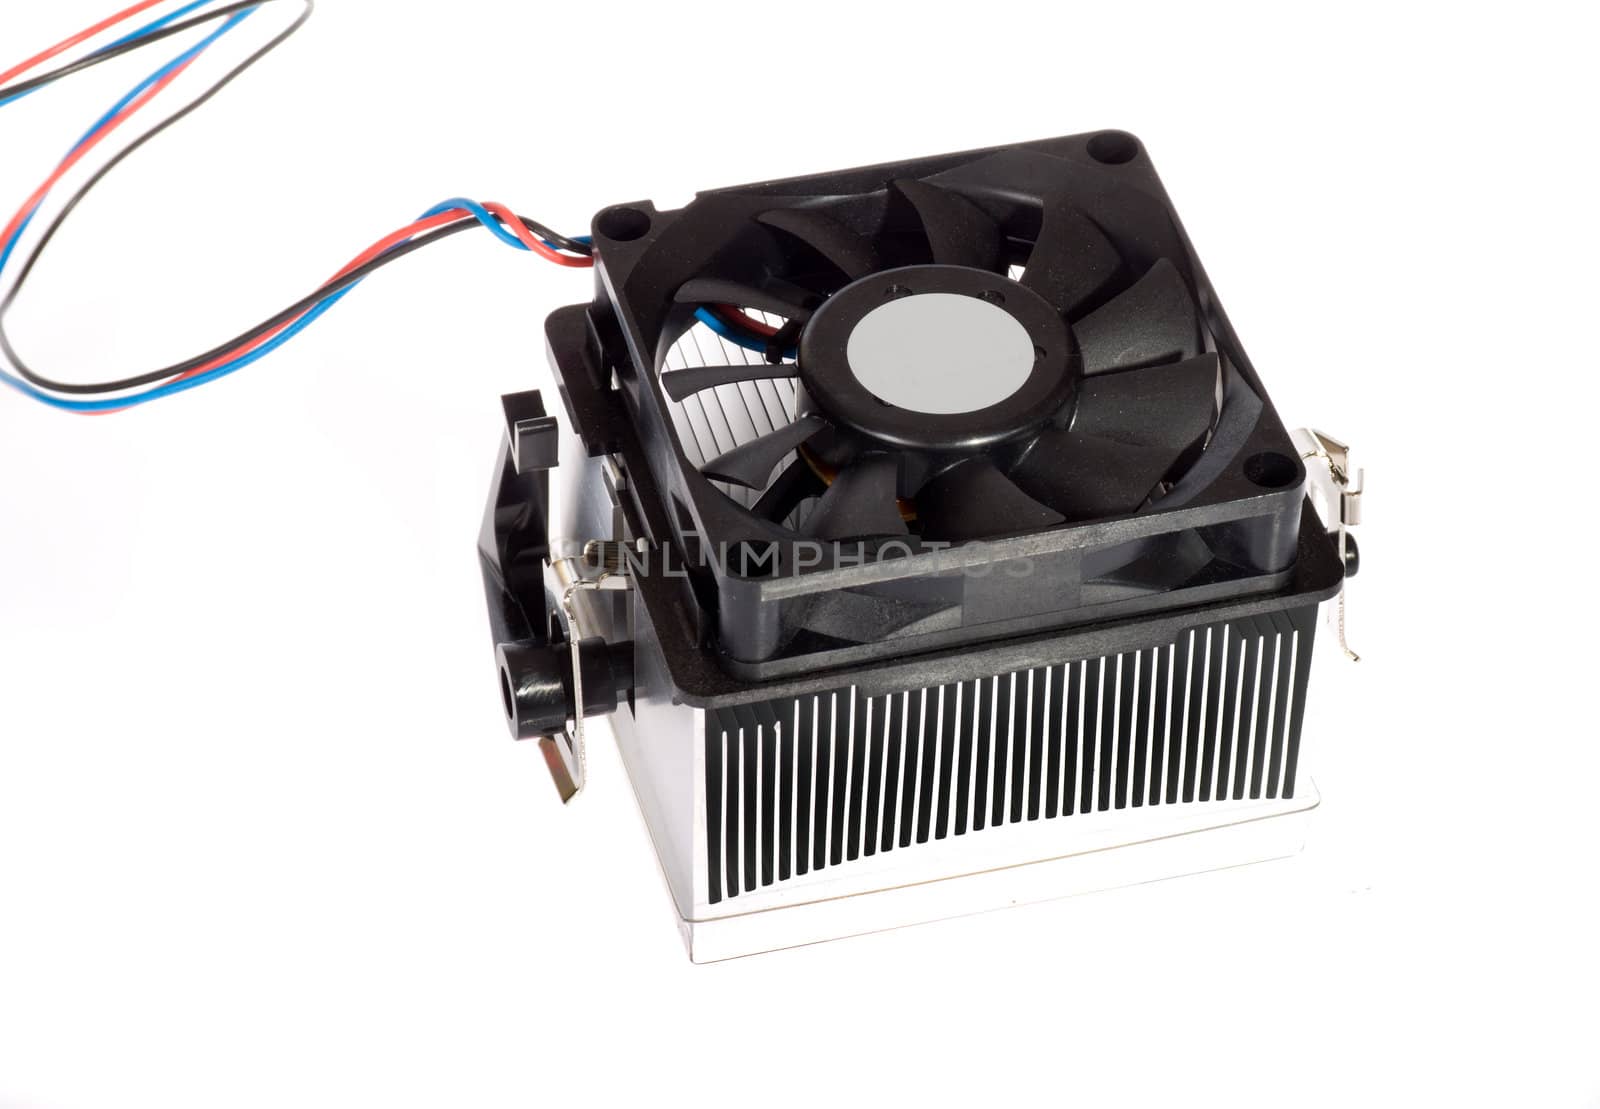 Cpu cooler, photo on the white background